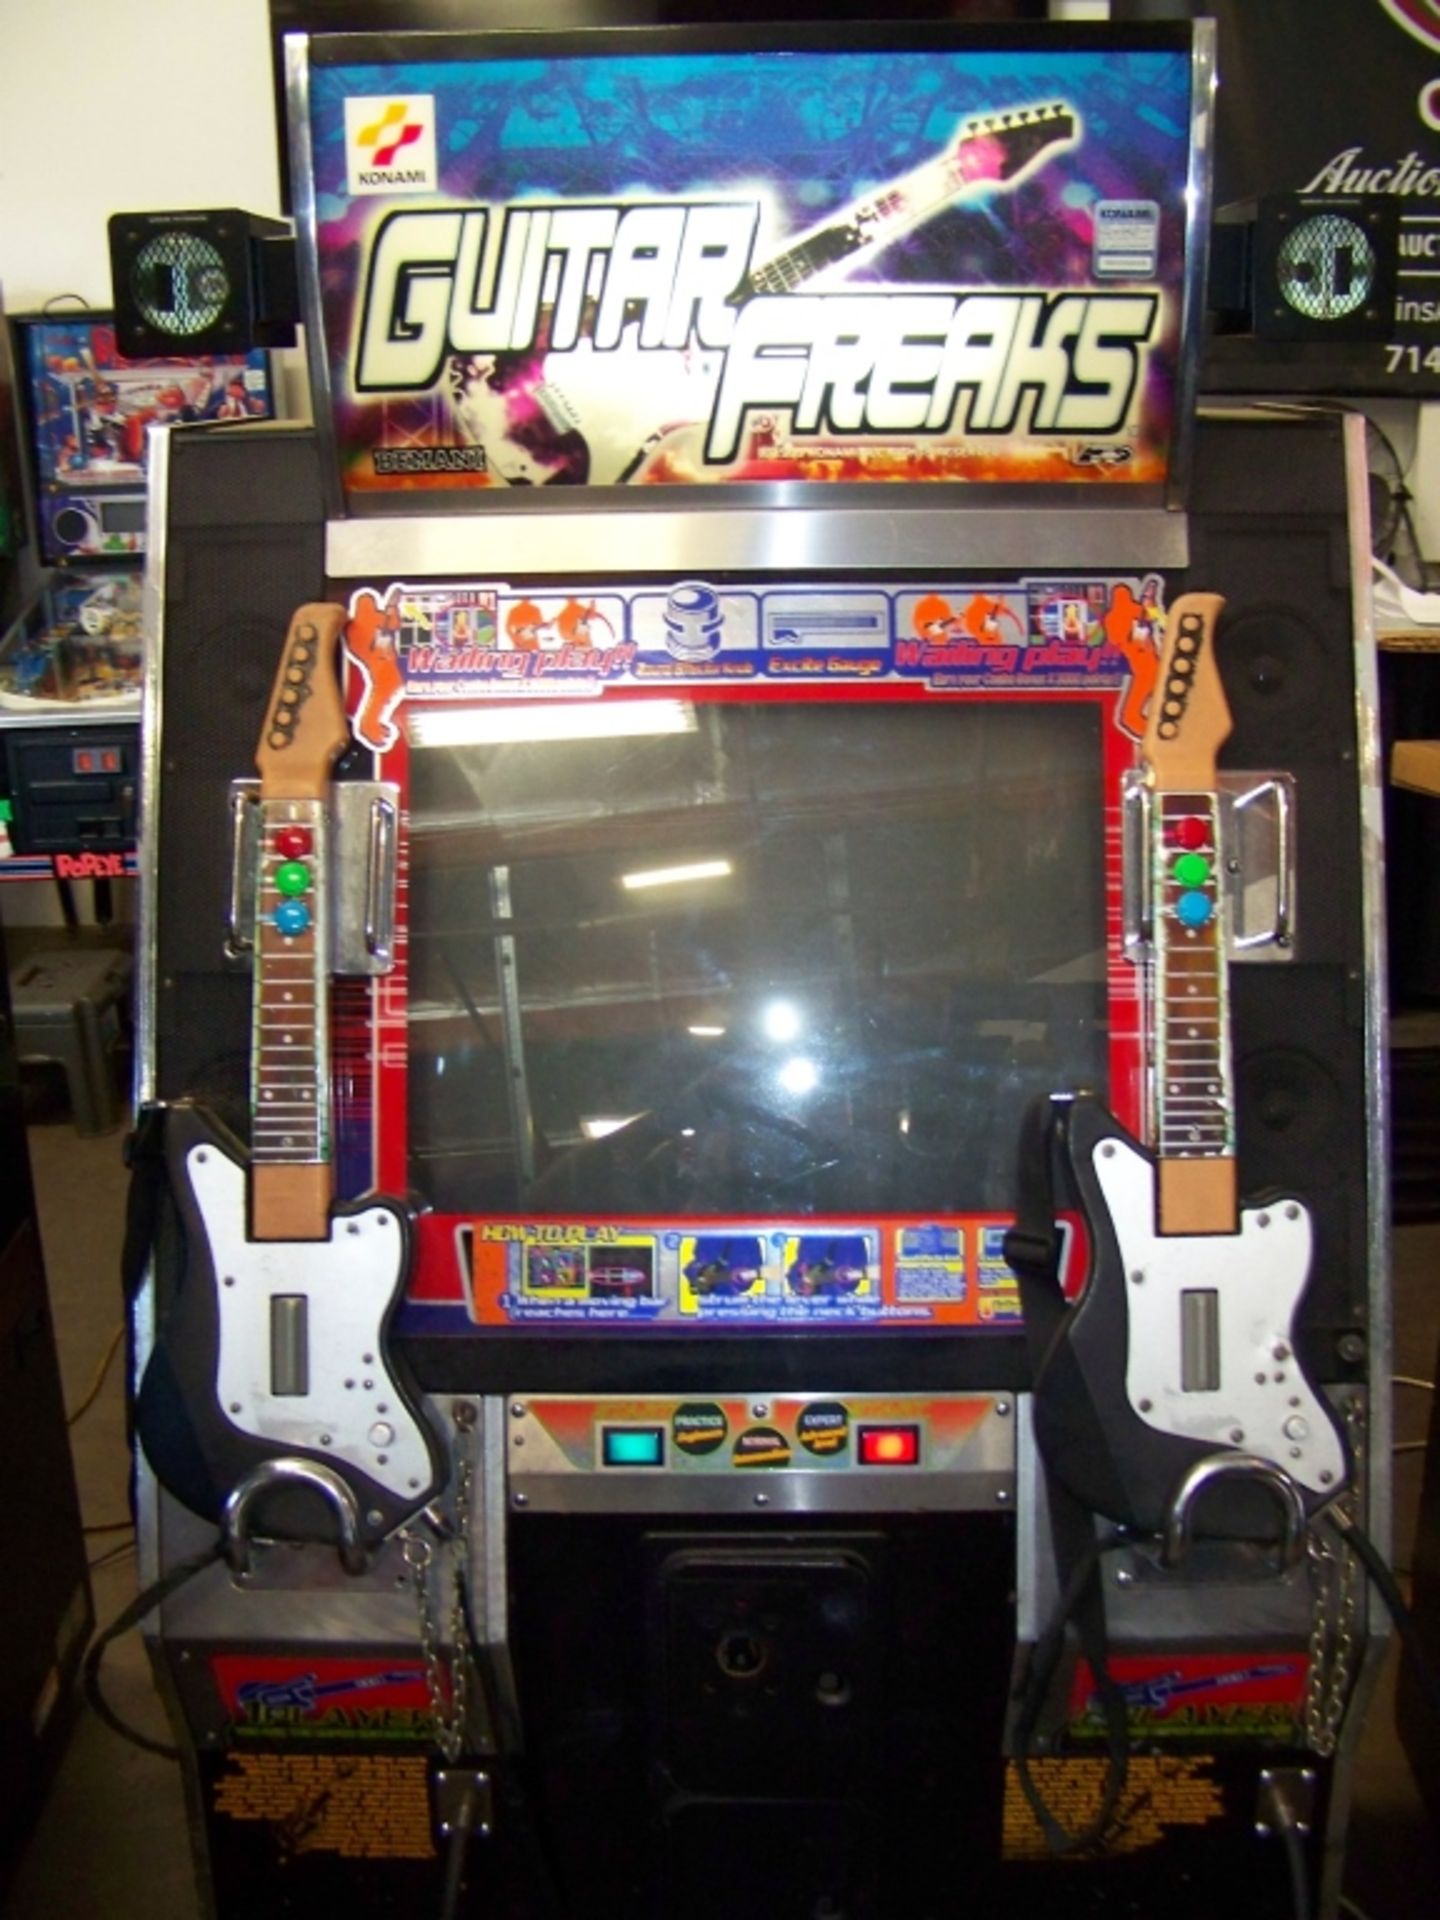 GUITAR FREAKS KONAMI MUSIC ARCADE GAME Item is in used condition. Evidence of wear and commercial